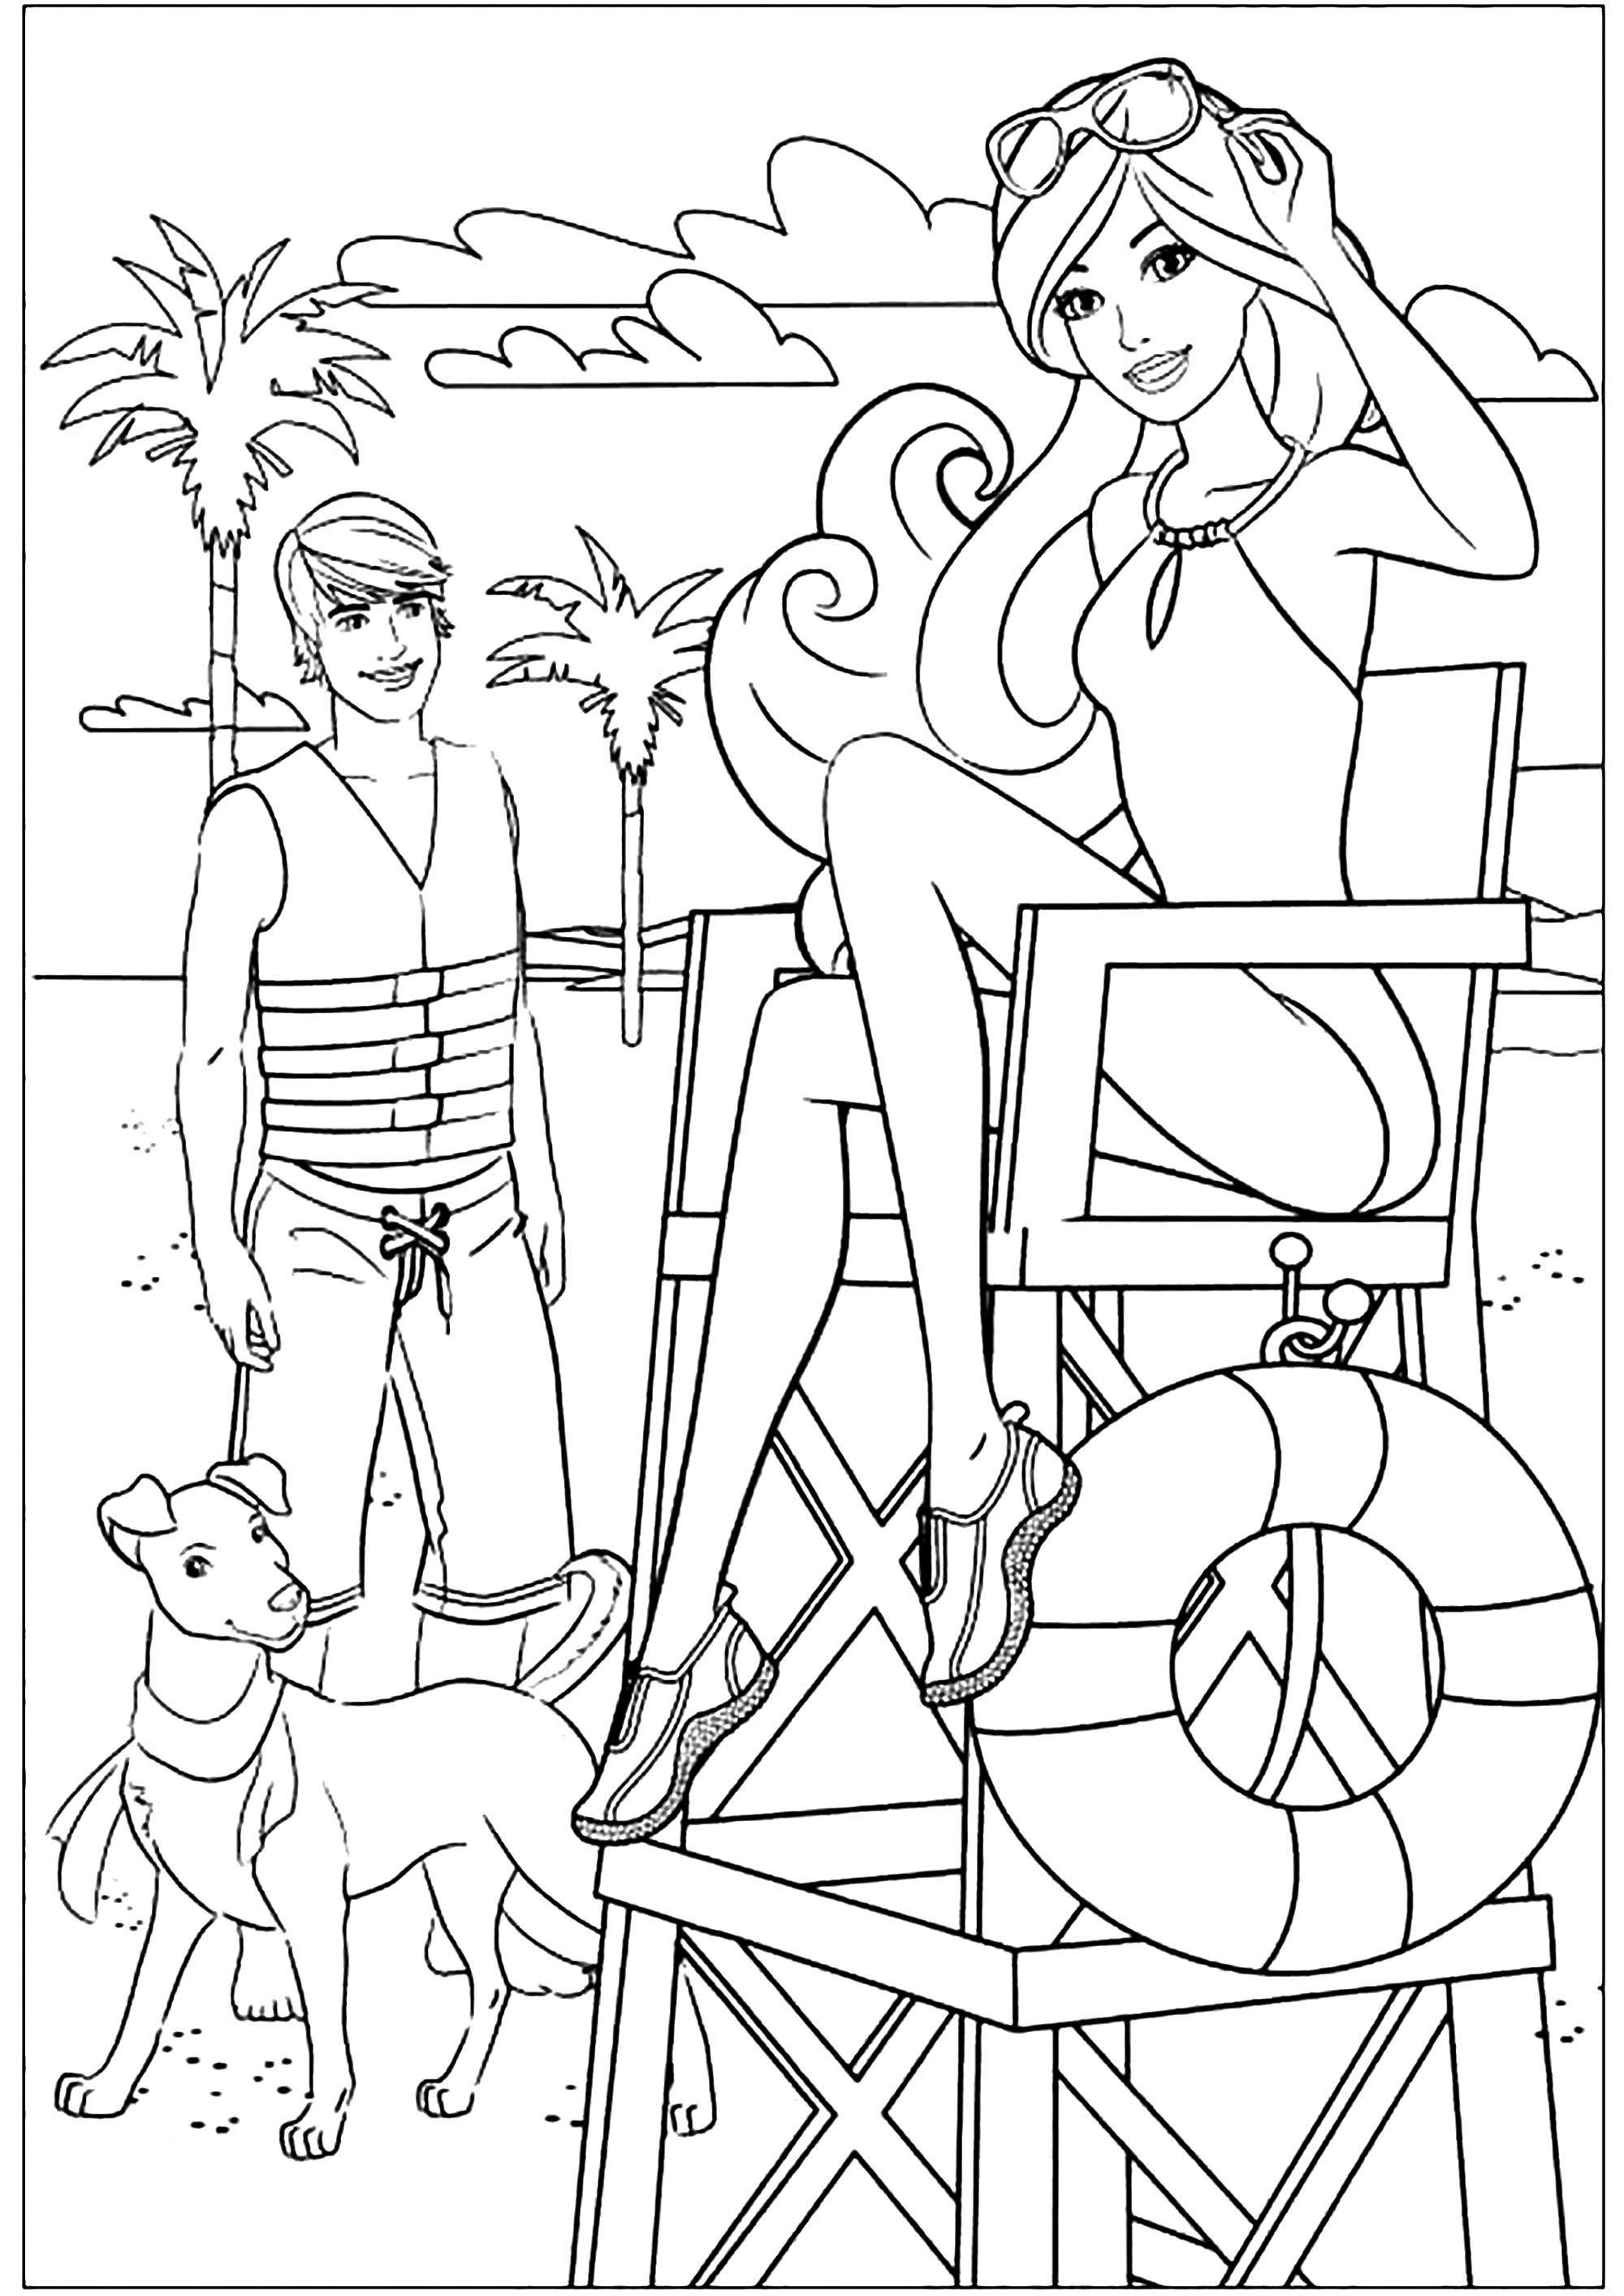 Barbie and Ken at the beach. Barbie makes sure everything goes smoothly at the beach